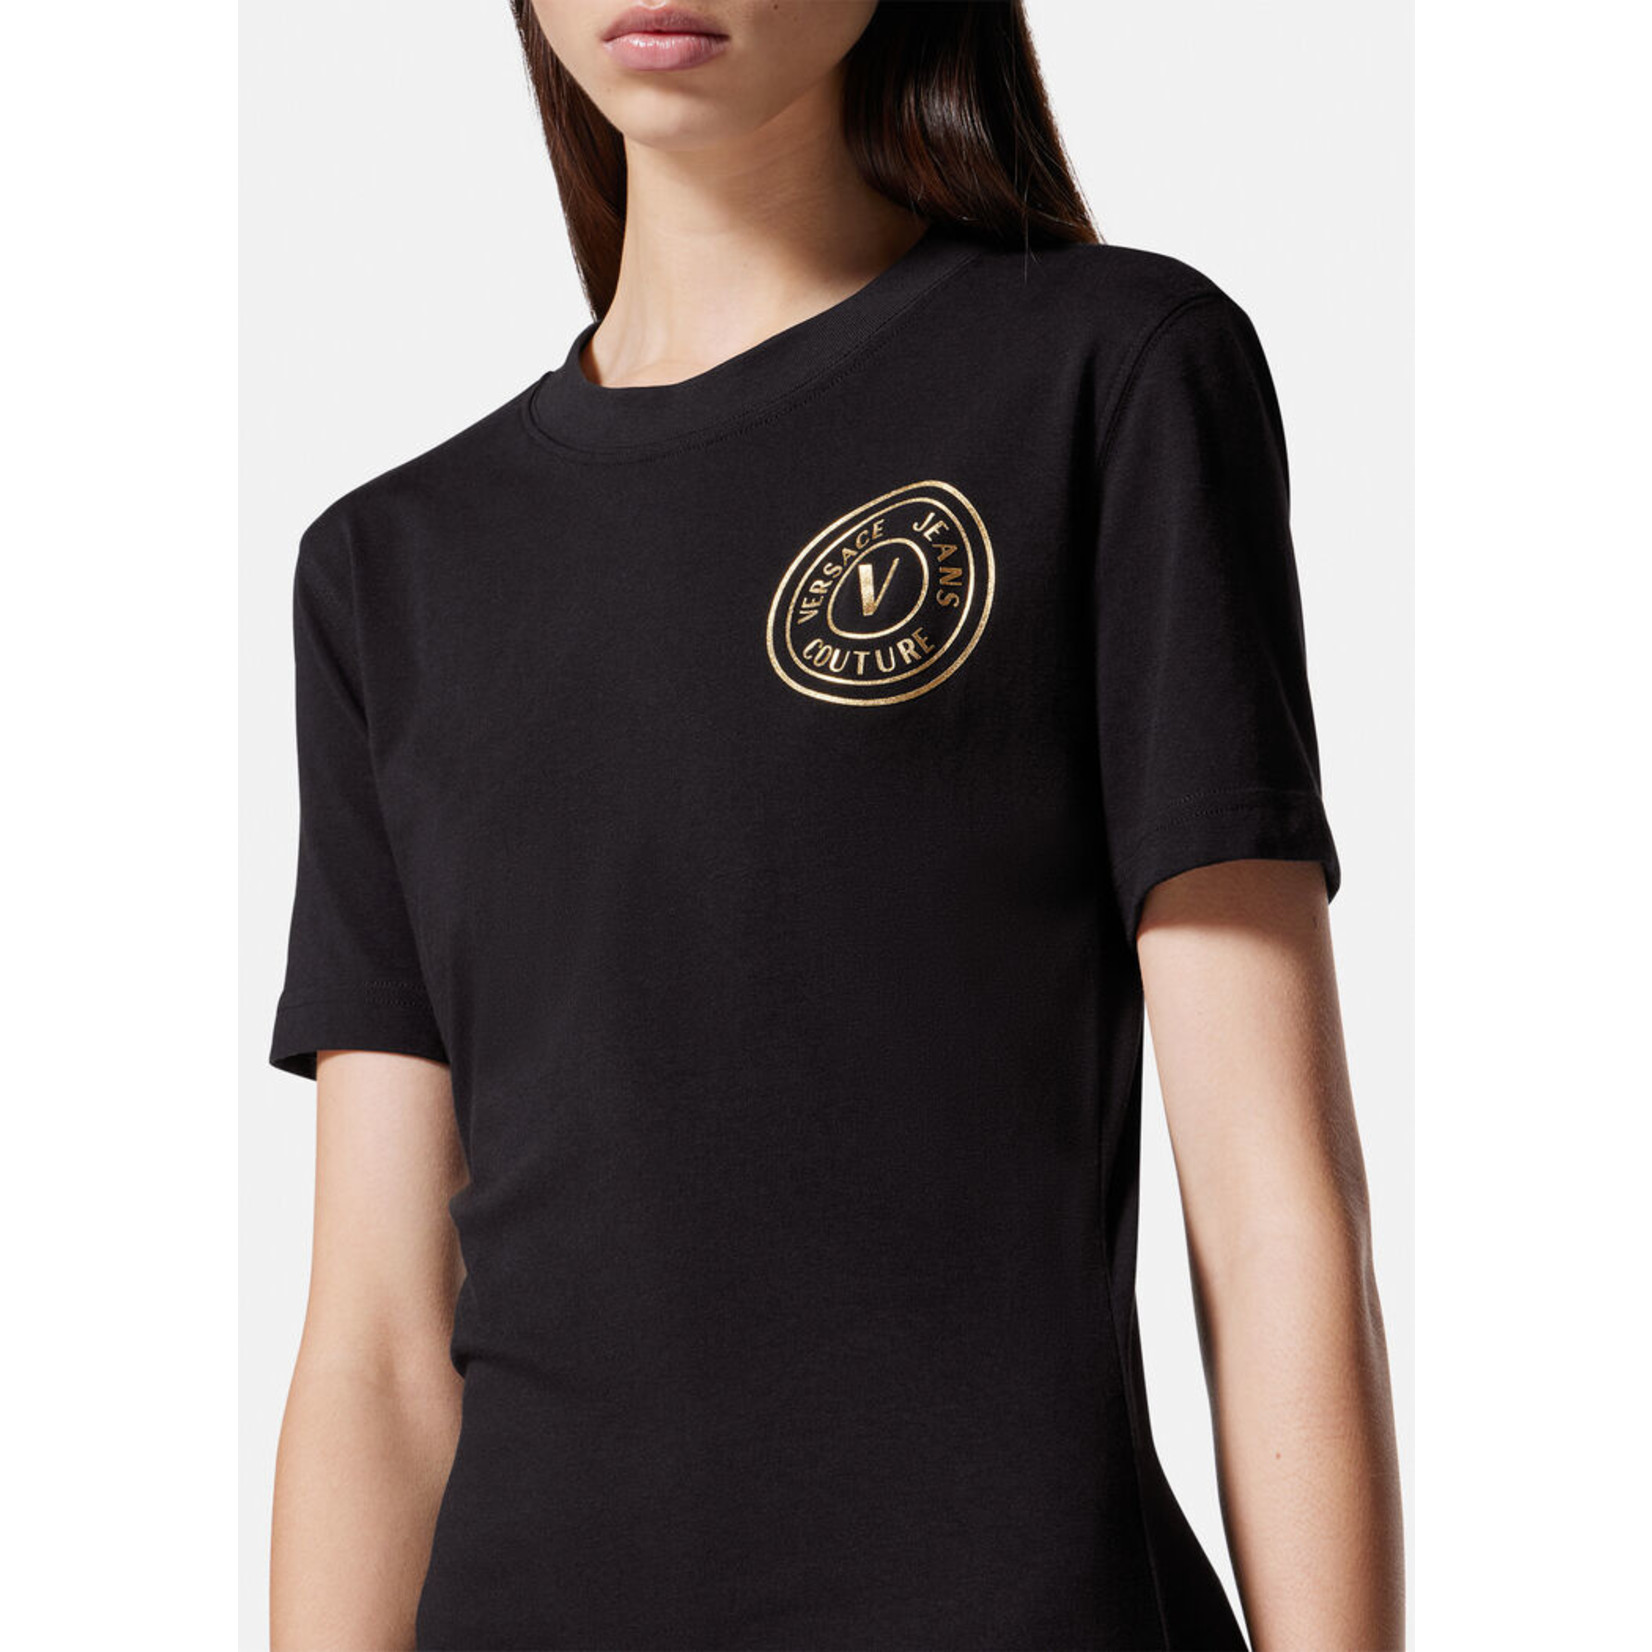 VERSACE JEANS COUTURE, Jersey Basic Logo Dress, Black/Gold G89